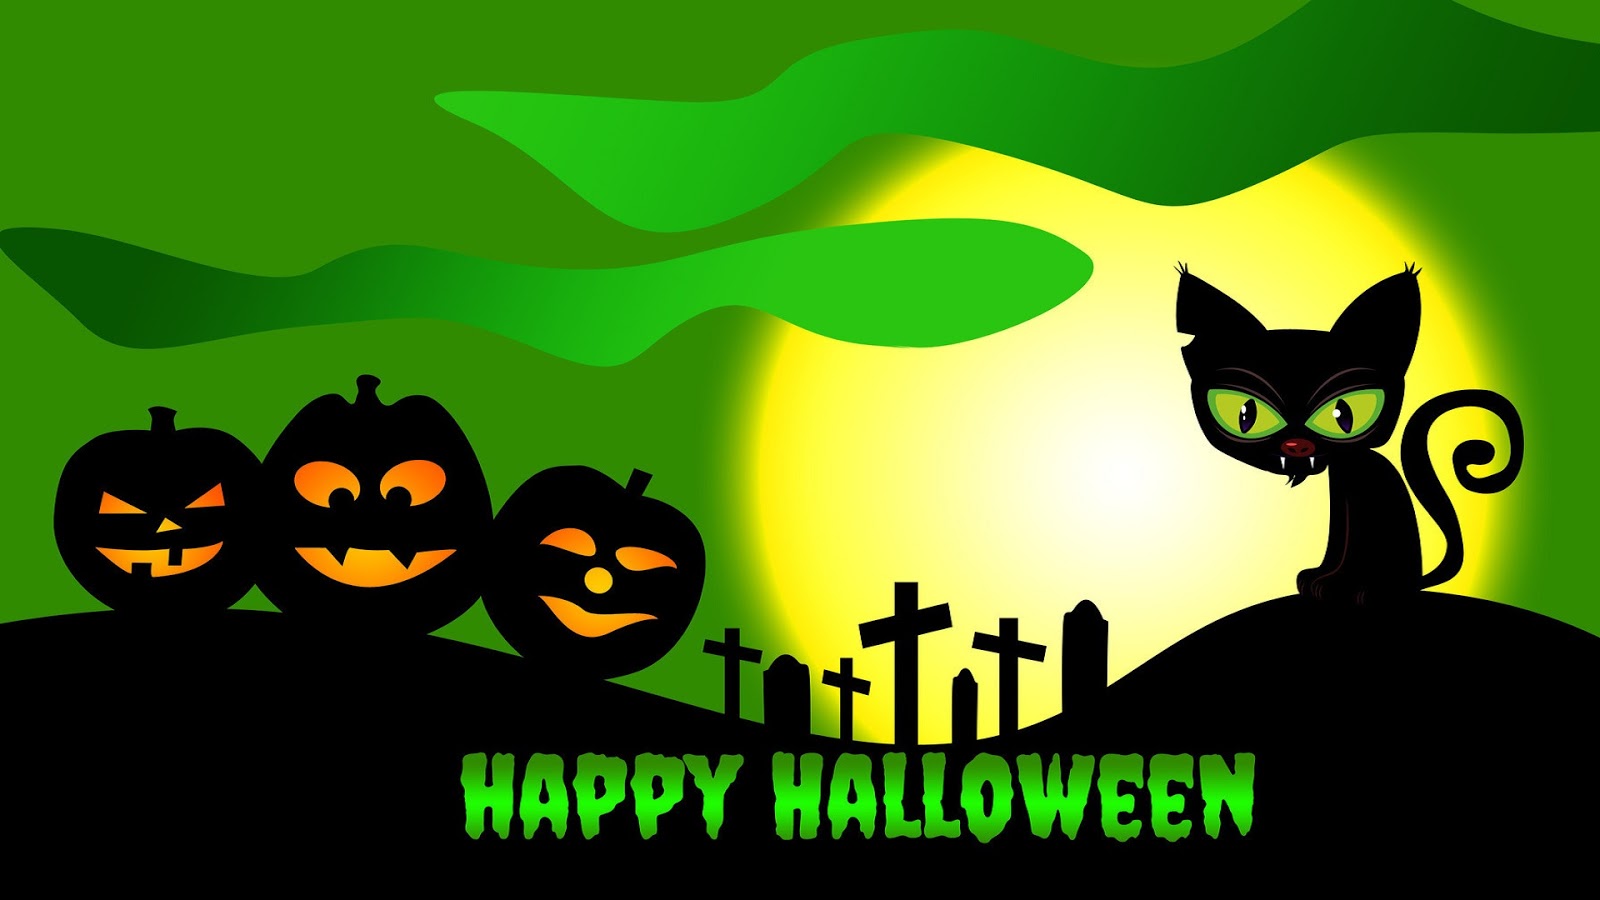 HD Wallpapers of Happy Halloween Day   Halloween Day HD